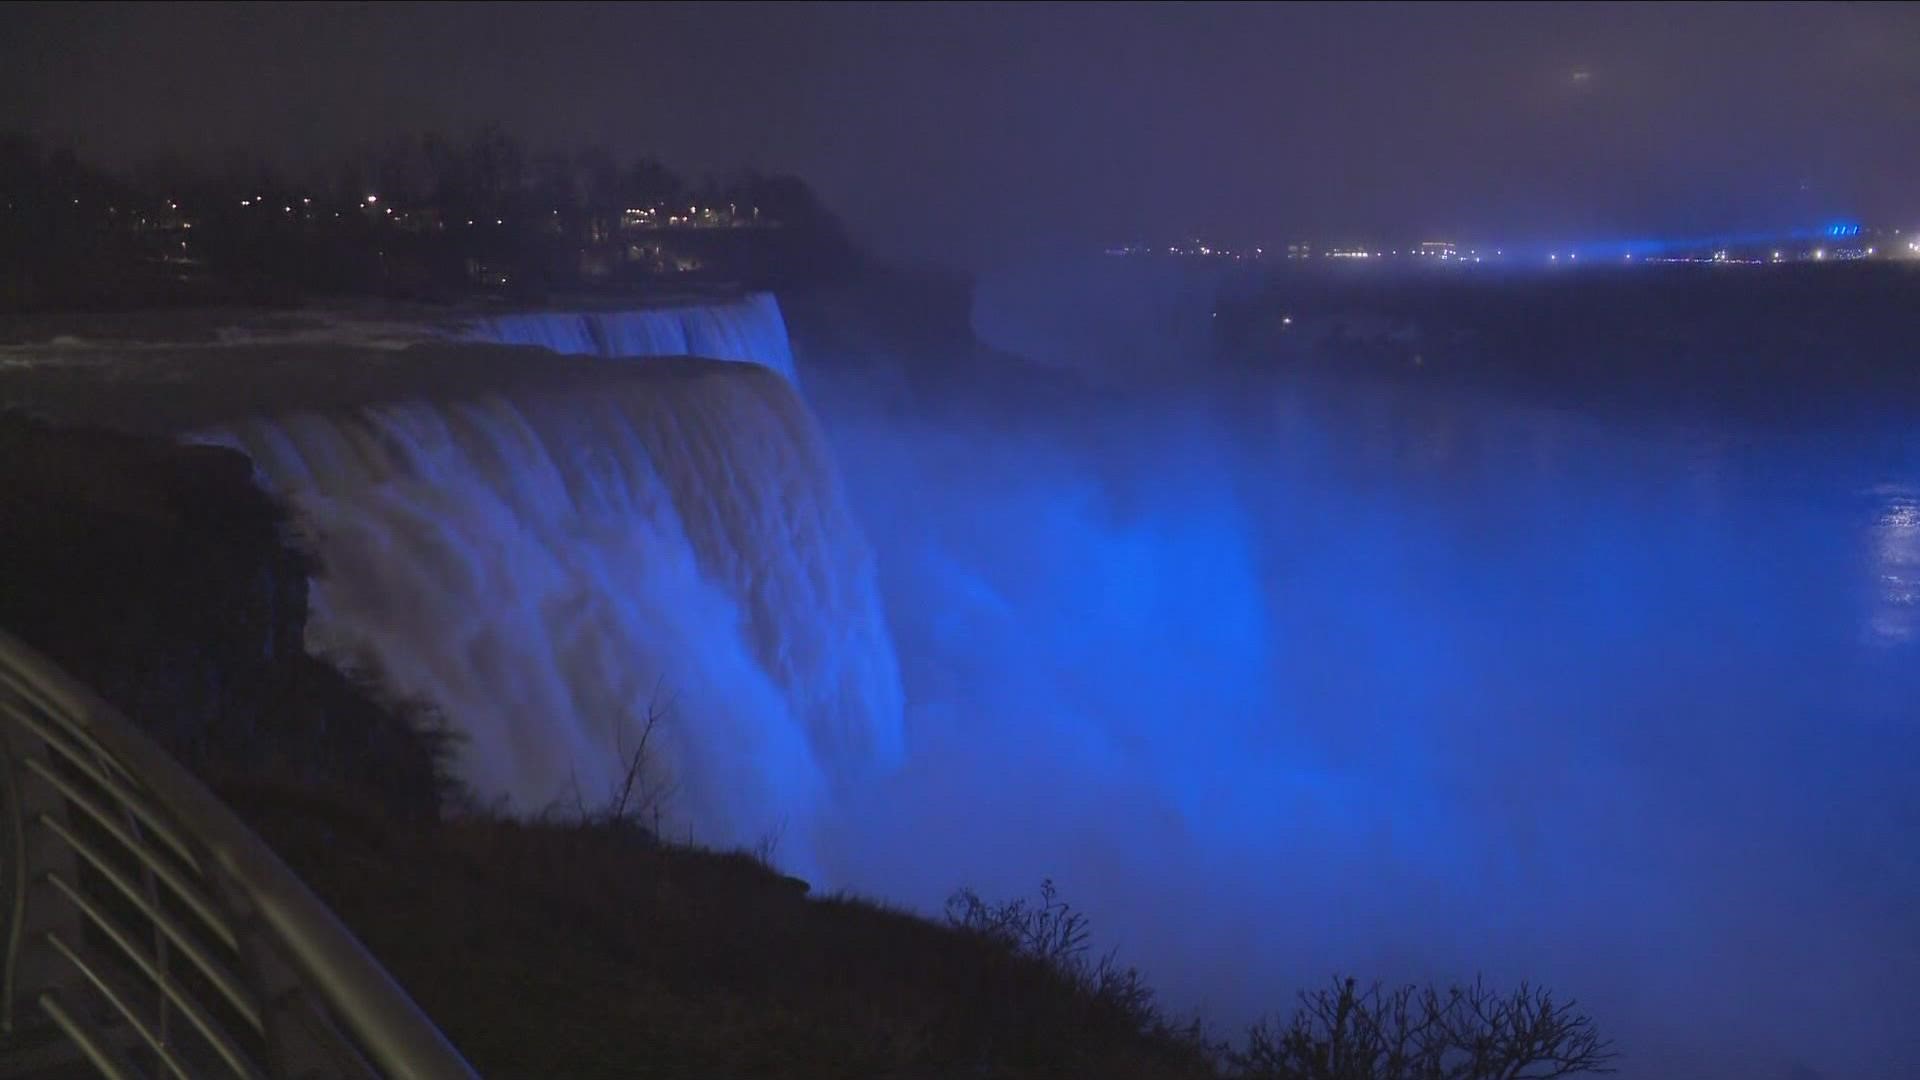 Niagara Falls illumination board has decided to show their support for Bills' safety during this tough time along with the City Hall in Buffalo.